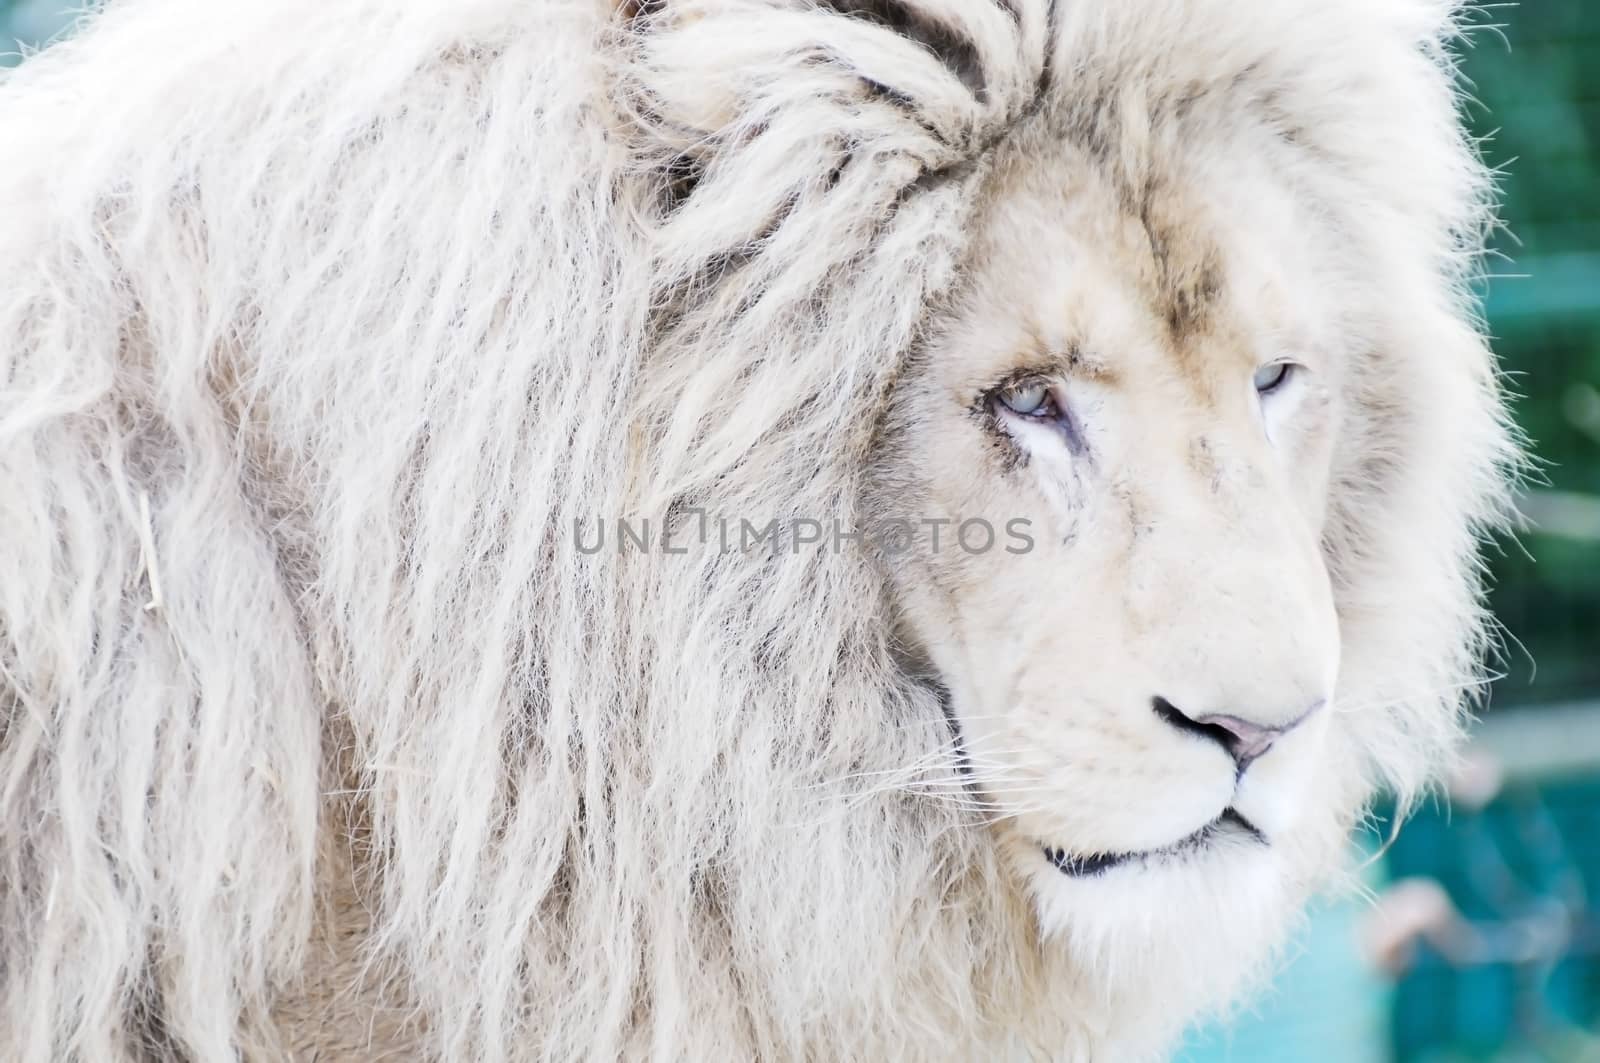 White lion closeup of head and face showing fur detail